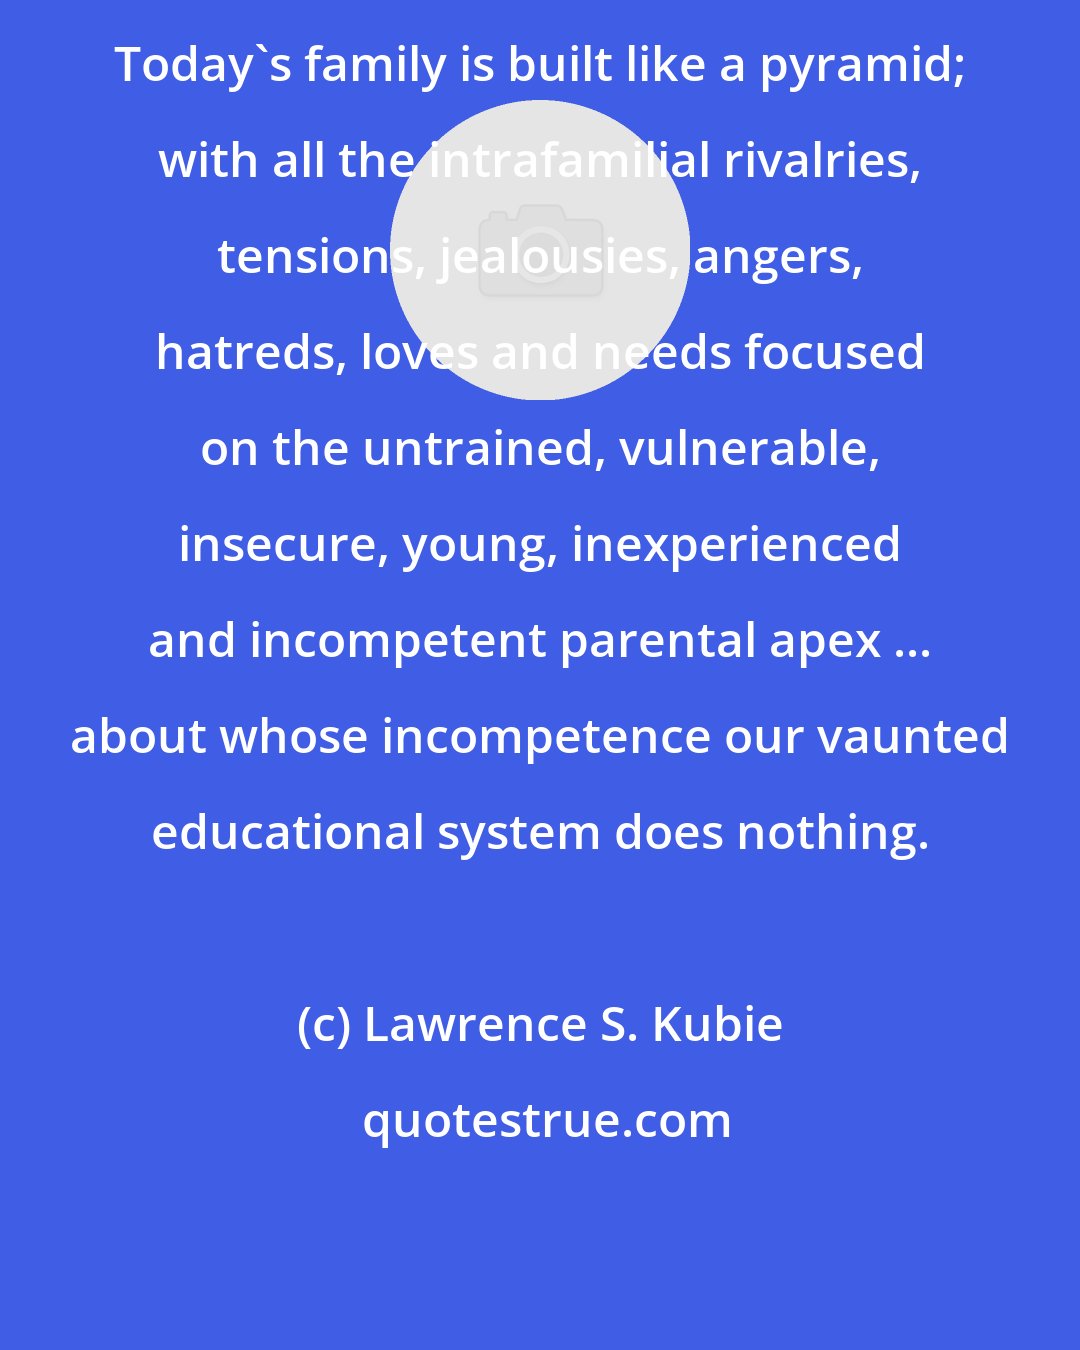 Lawrence S. Kubie: Today's family is built like a pyramid; with all the intrafamilial rivalries, tensions, jealousies, angers, hatreds, loves and needs focused on the untrained, vulnerable, insecure, young, inexperienced and incompetent parental apex ... about whose incompetence our vaunted educational system does nothing.